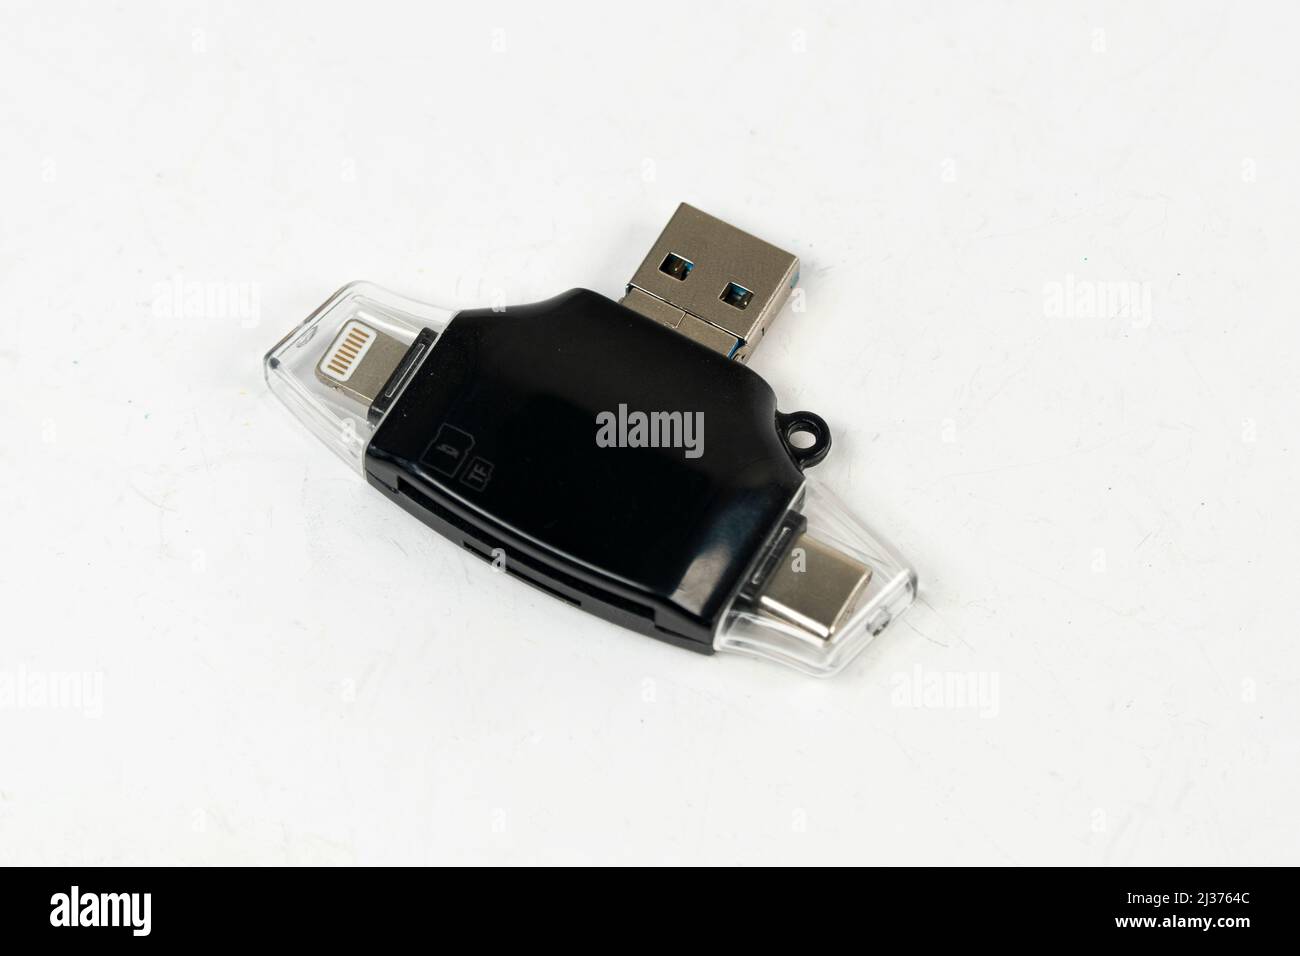 Micro usb device isolated on white background, smartphone connection tool, black usb device top view selective focus Stock Photo